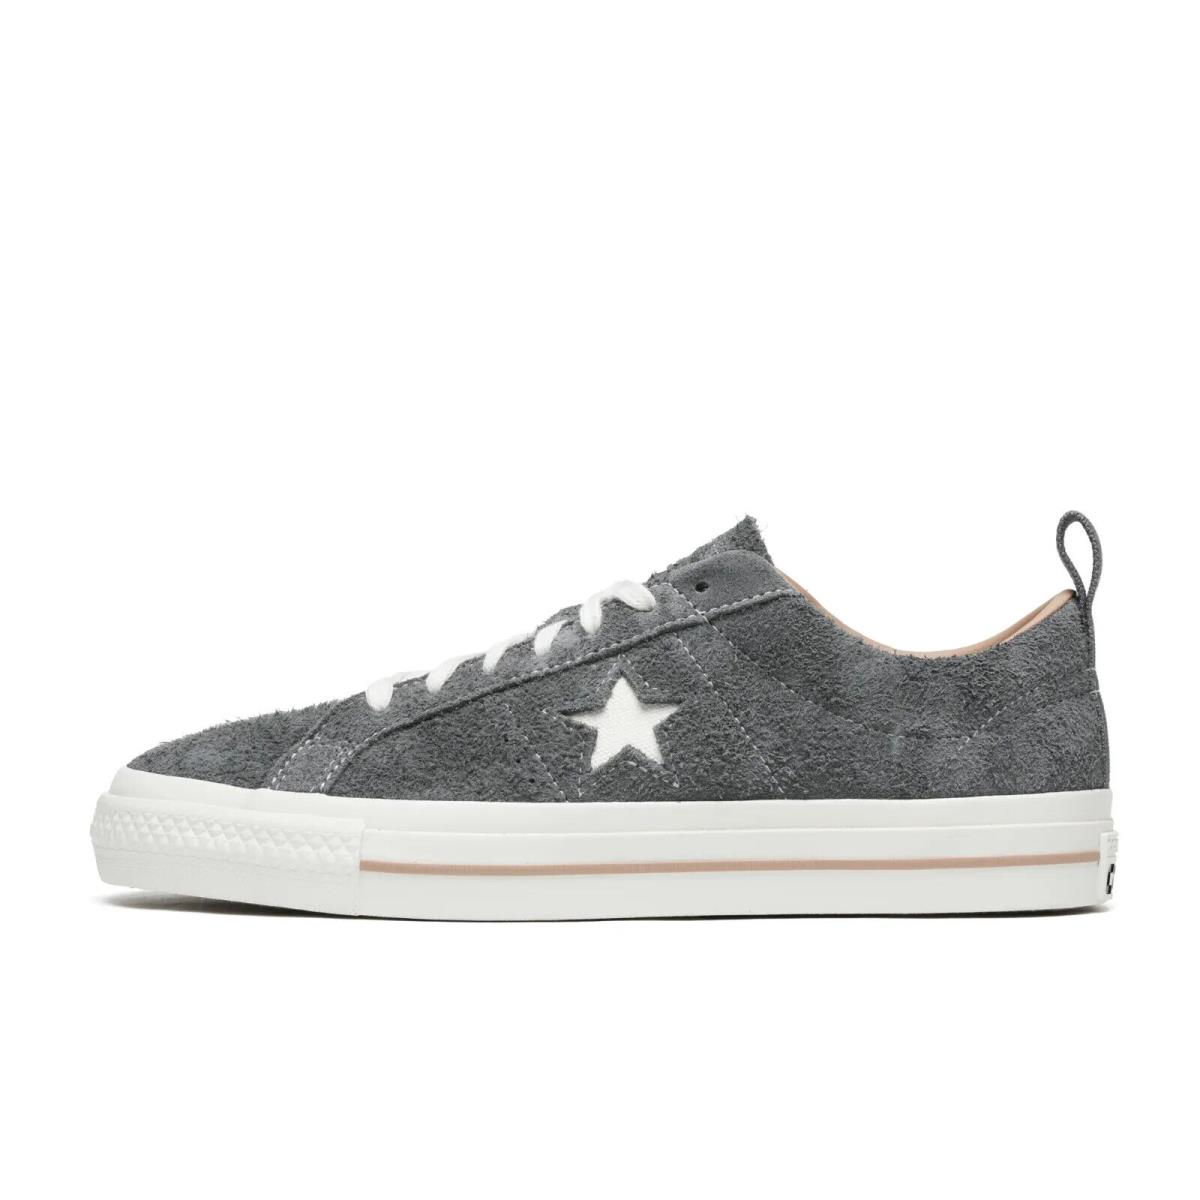 Converse One Star Pro Vintage Suede Low `cyber Grey Champagne` Shoes A02948C